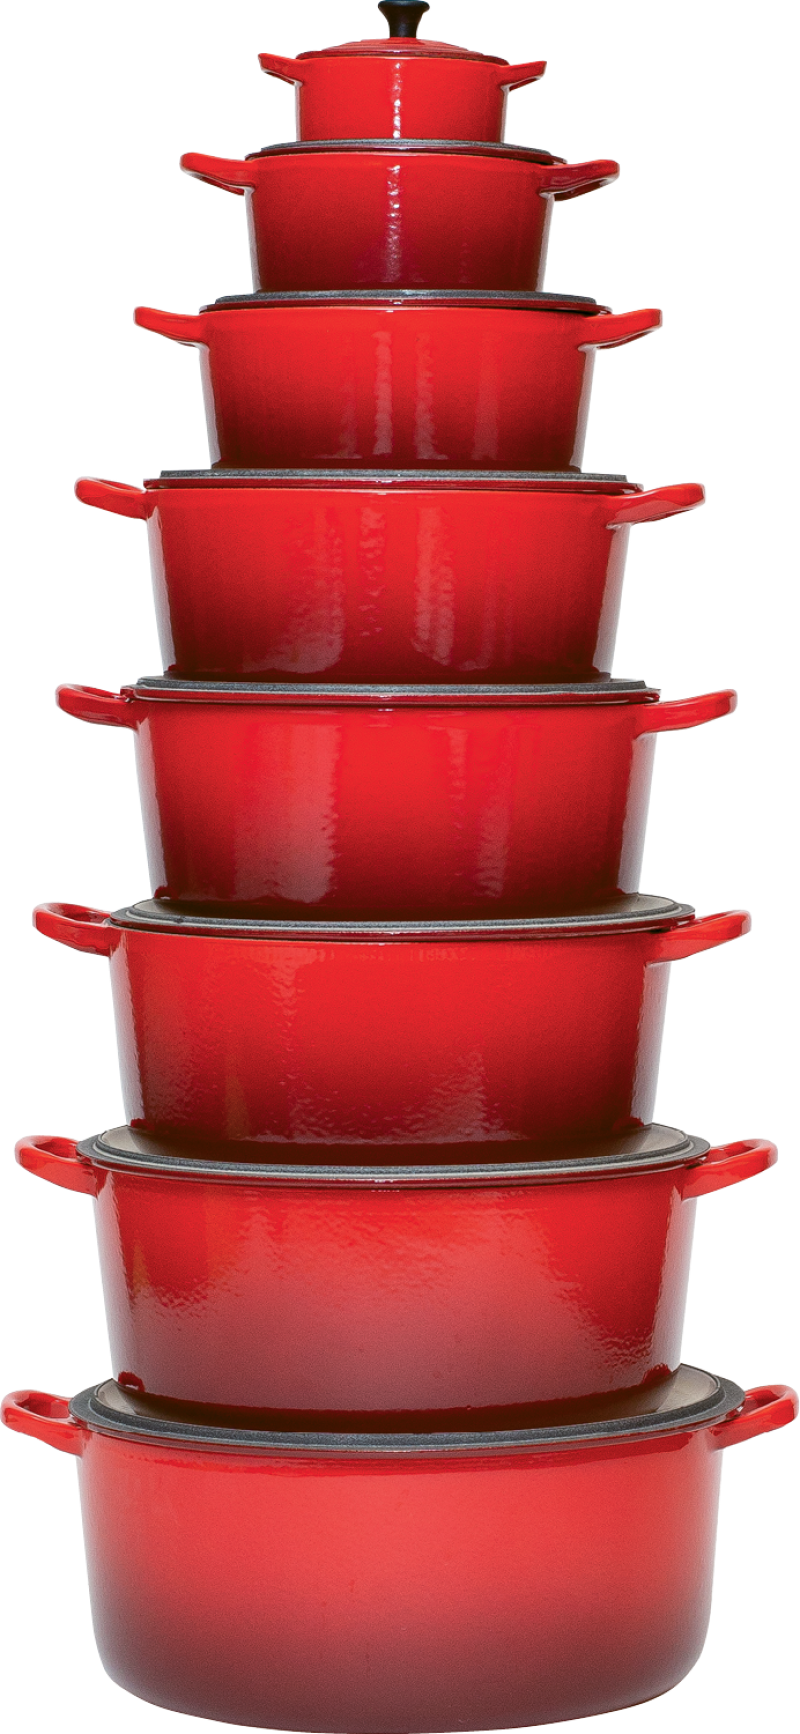 ”Cherry”-hued cookware in many sizes